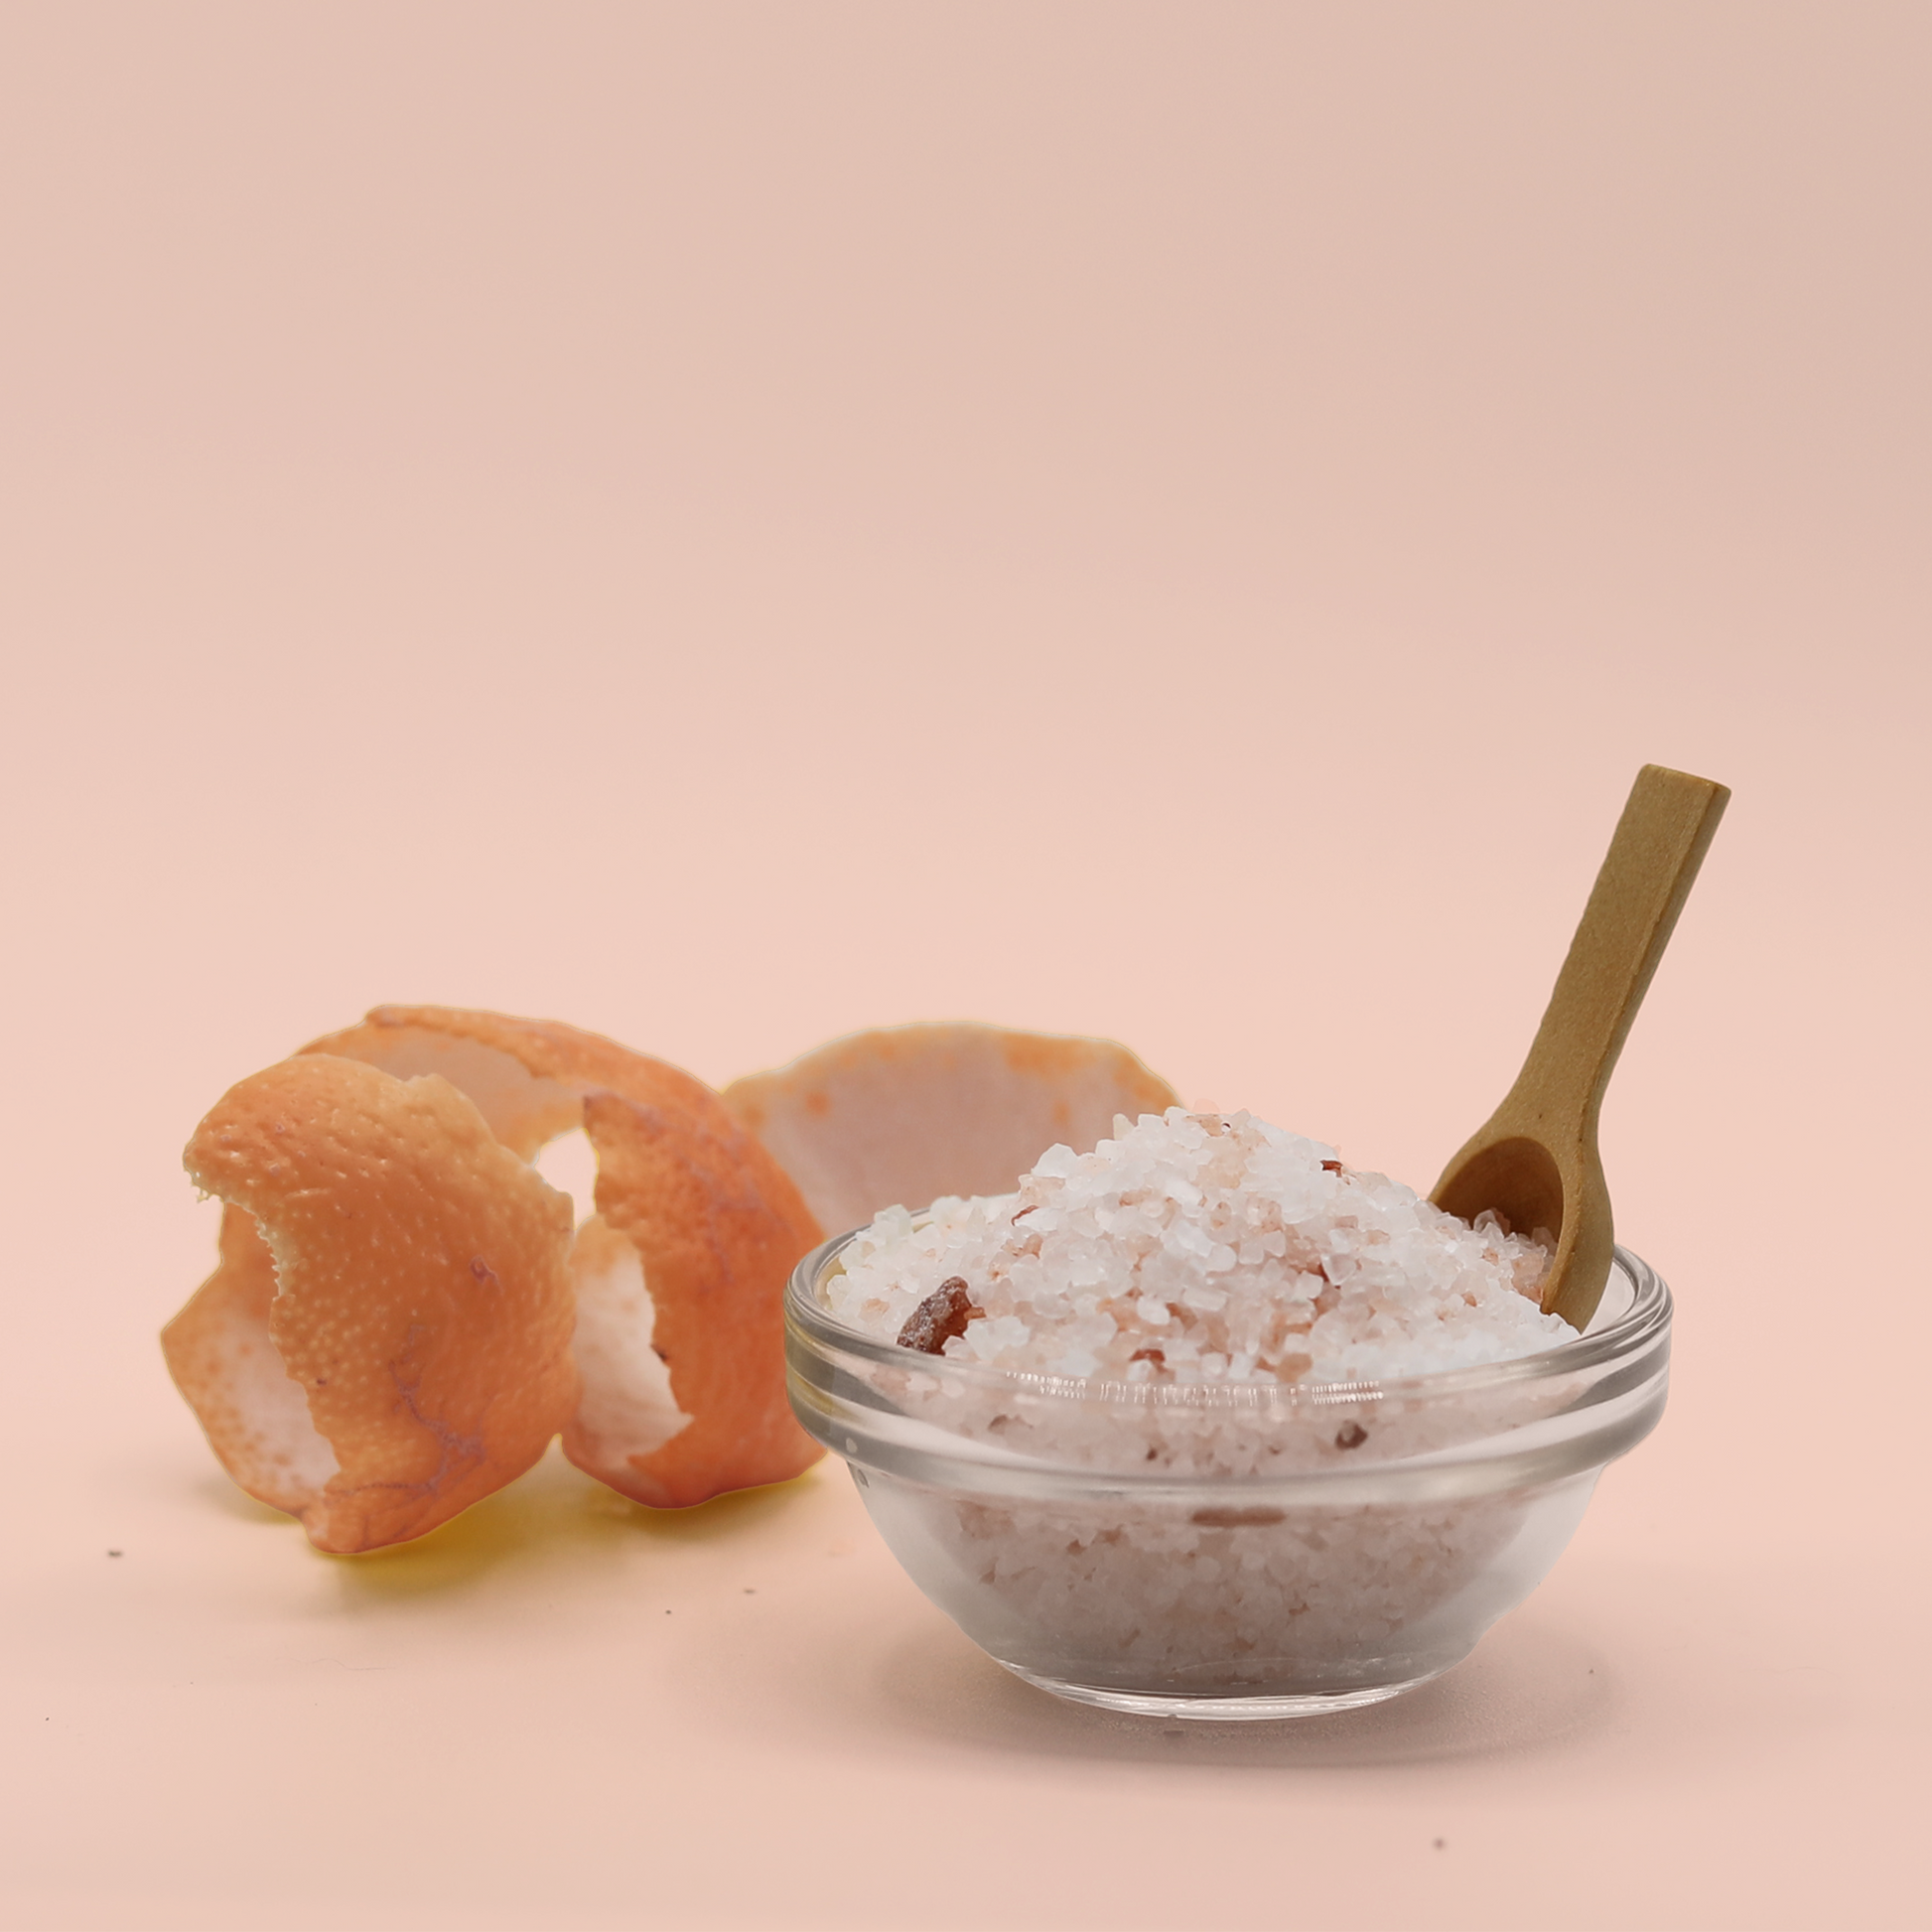 A little glass bowl filled with light pink bath salts next to a curled grapefruit peel. A Good Store product.